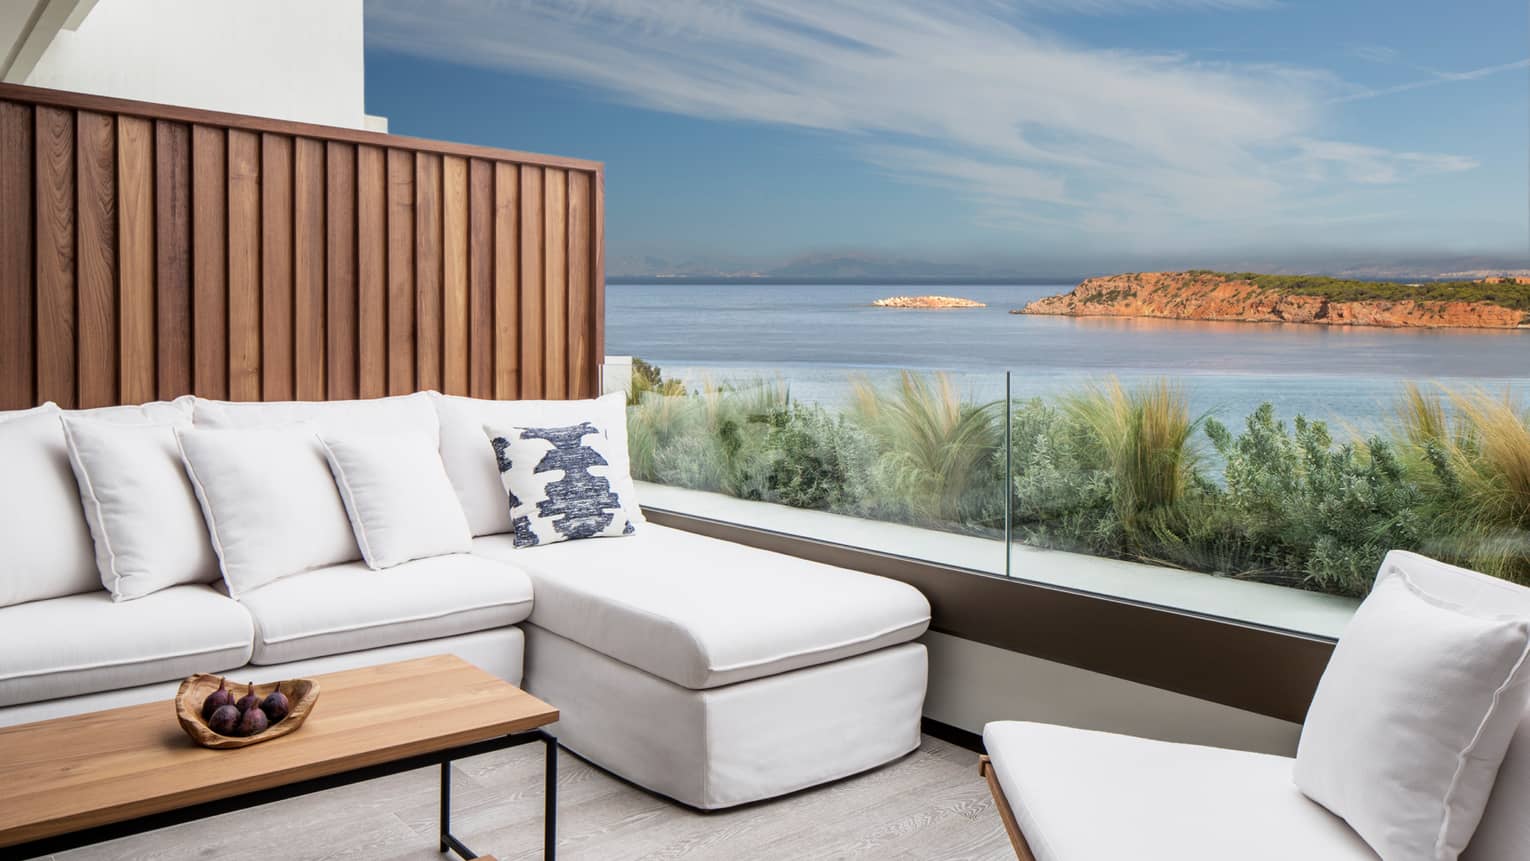 Outdoor terrace with white sofa and accent chair, rectangular coffee table, ocean views